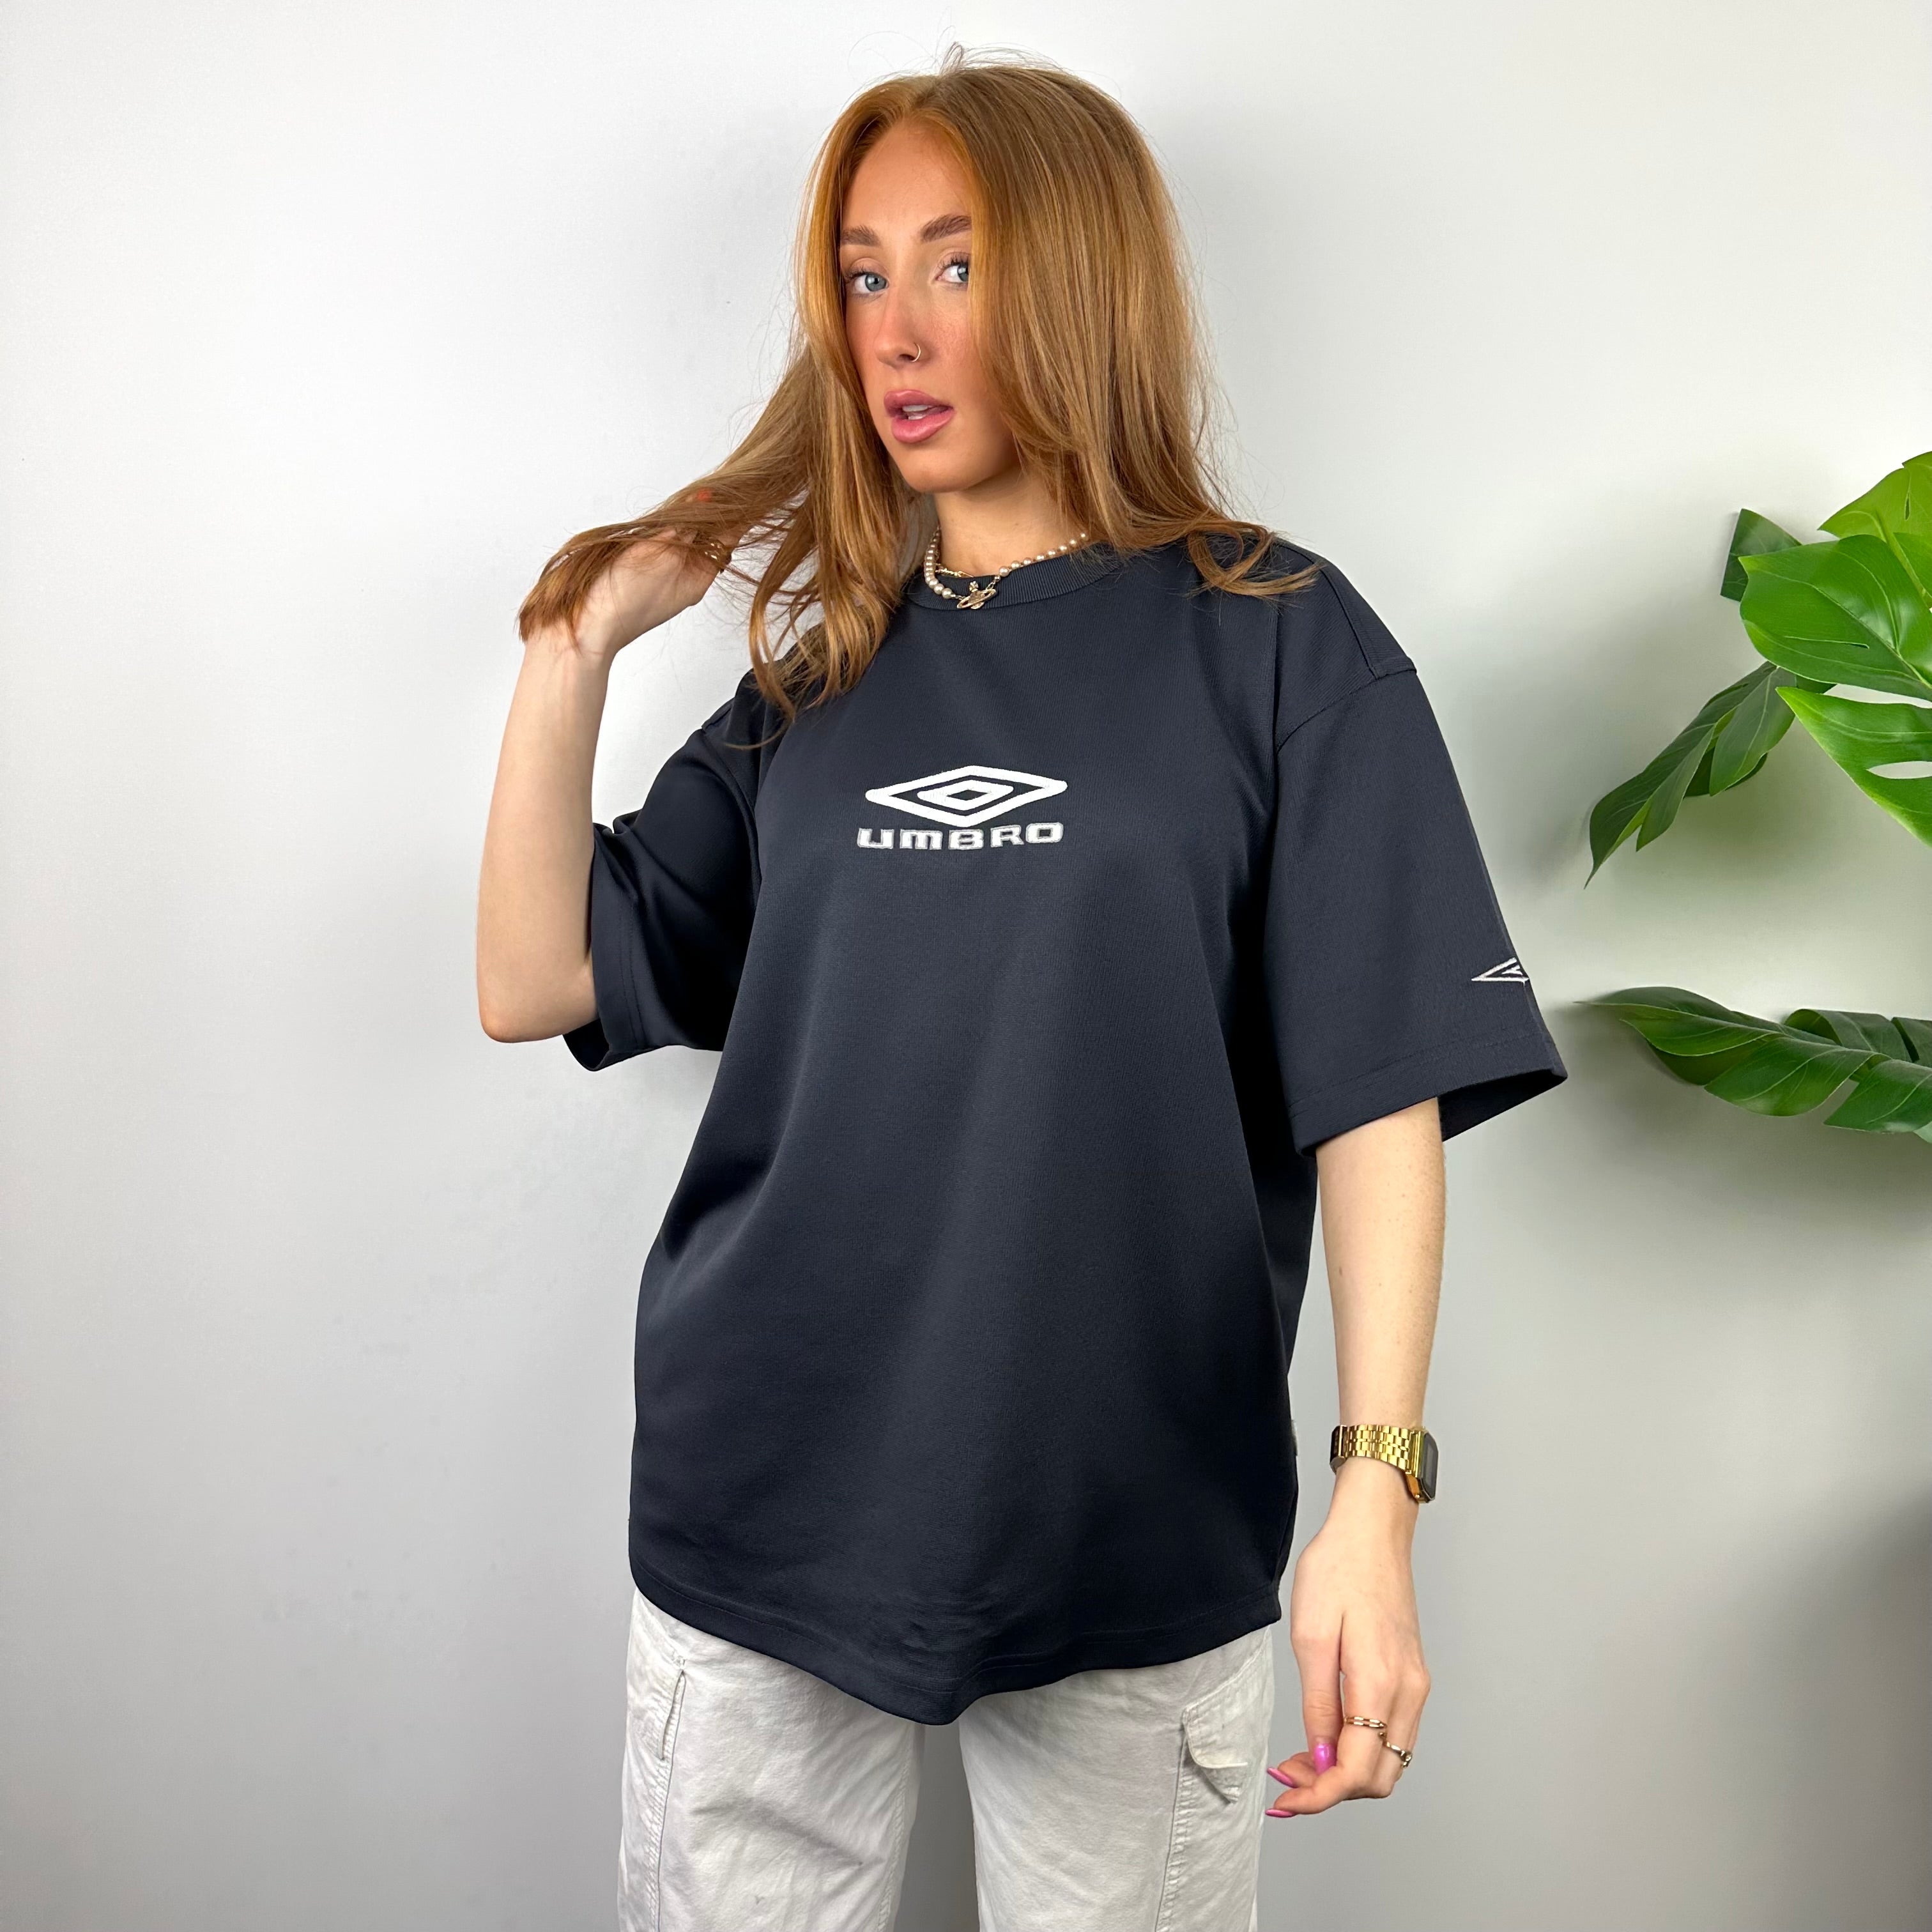 Umbro Black Embroidered Spell Out T Shirt (L)